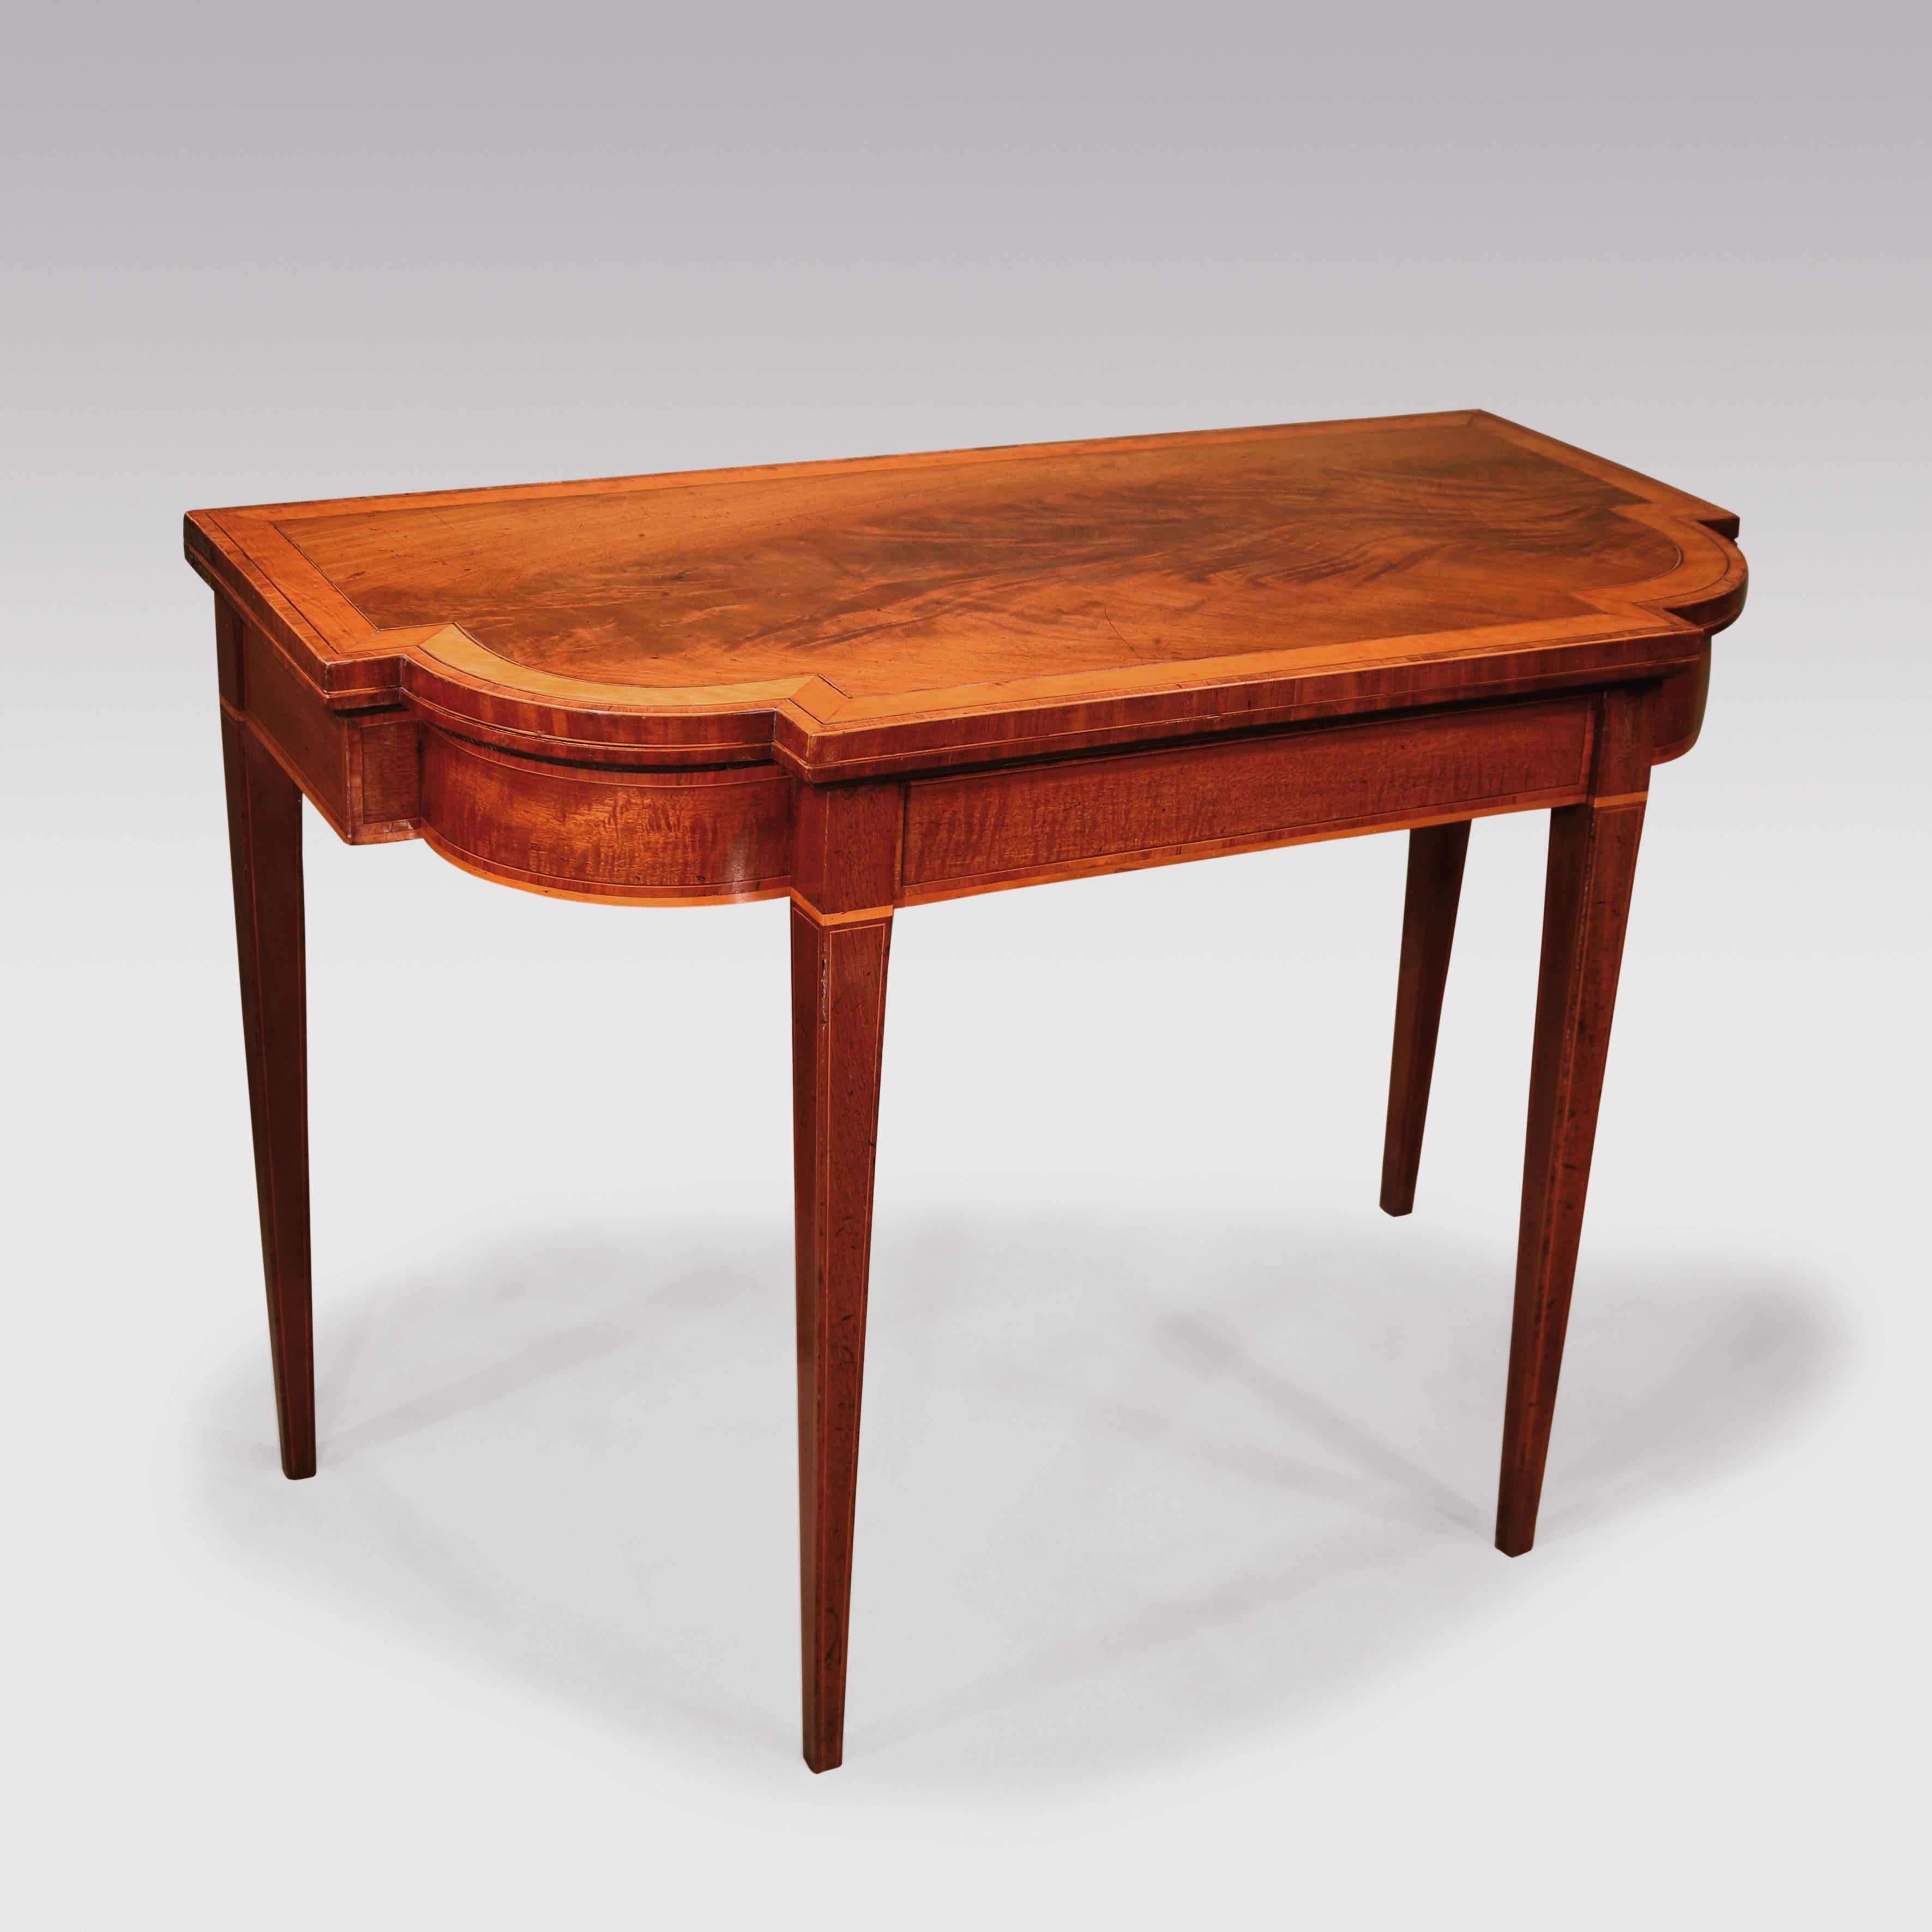 A fine quality late 18th century Sheraton period breakfront mahogany card table, having flame figured satinwood & tulipwood crossbanded top, above fiddleback mahogany frieze supported on boxwood strung square tapering legs.